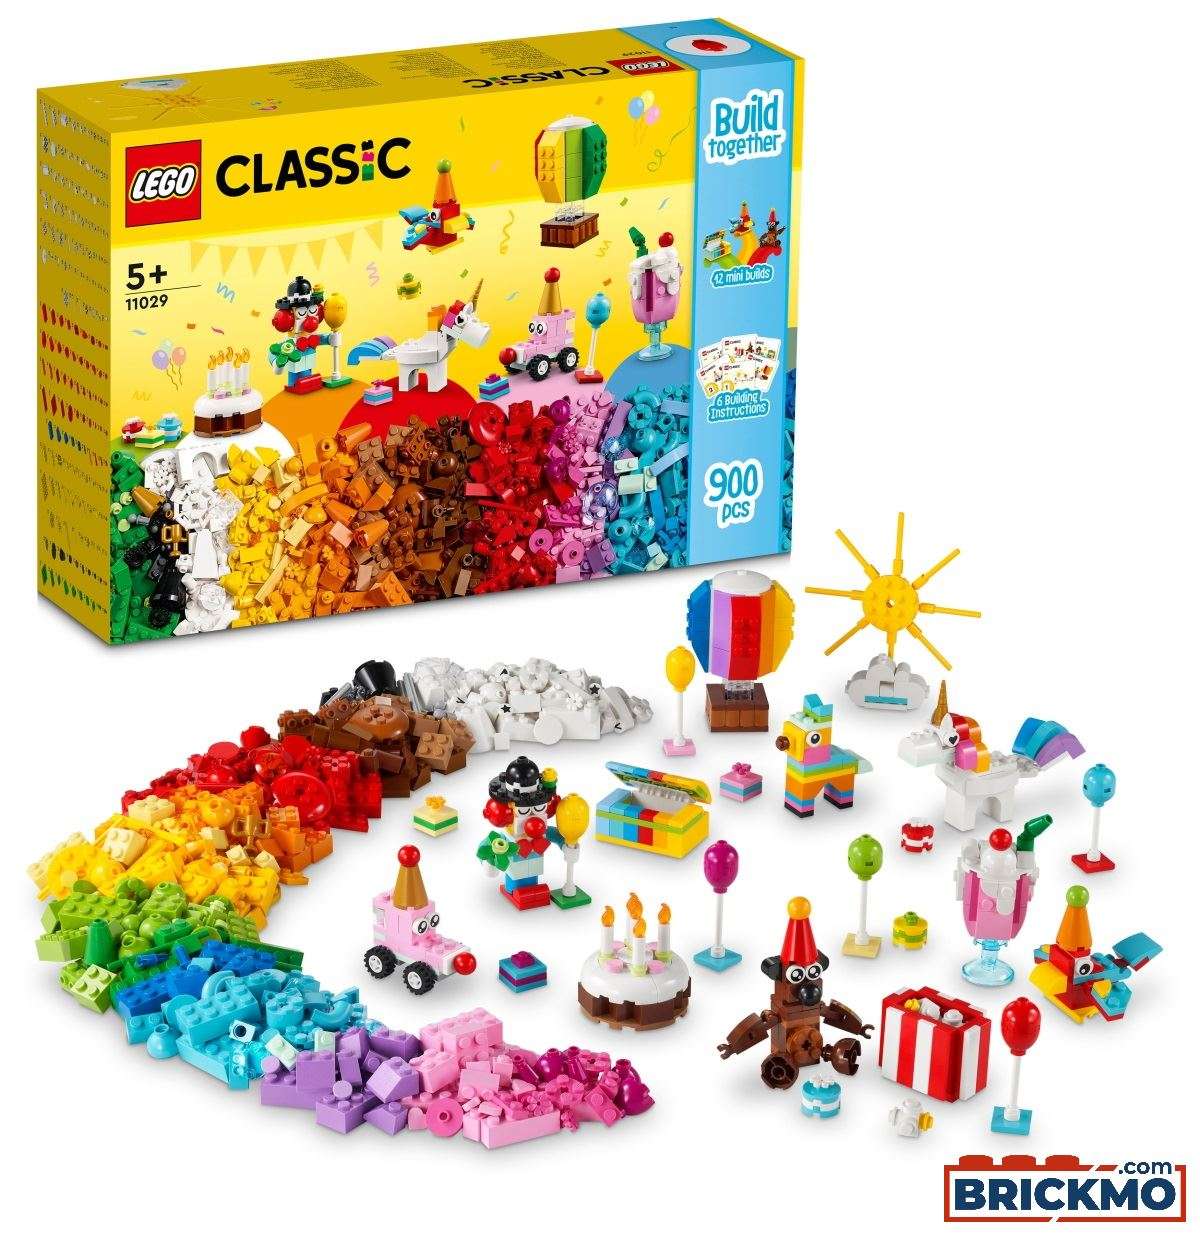 LEGO Classic 11029 Party Kreativ-Bauset 11029